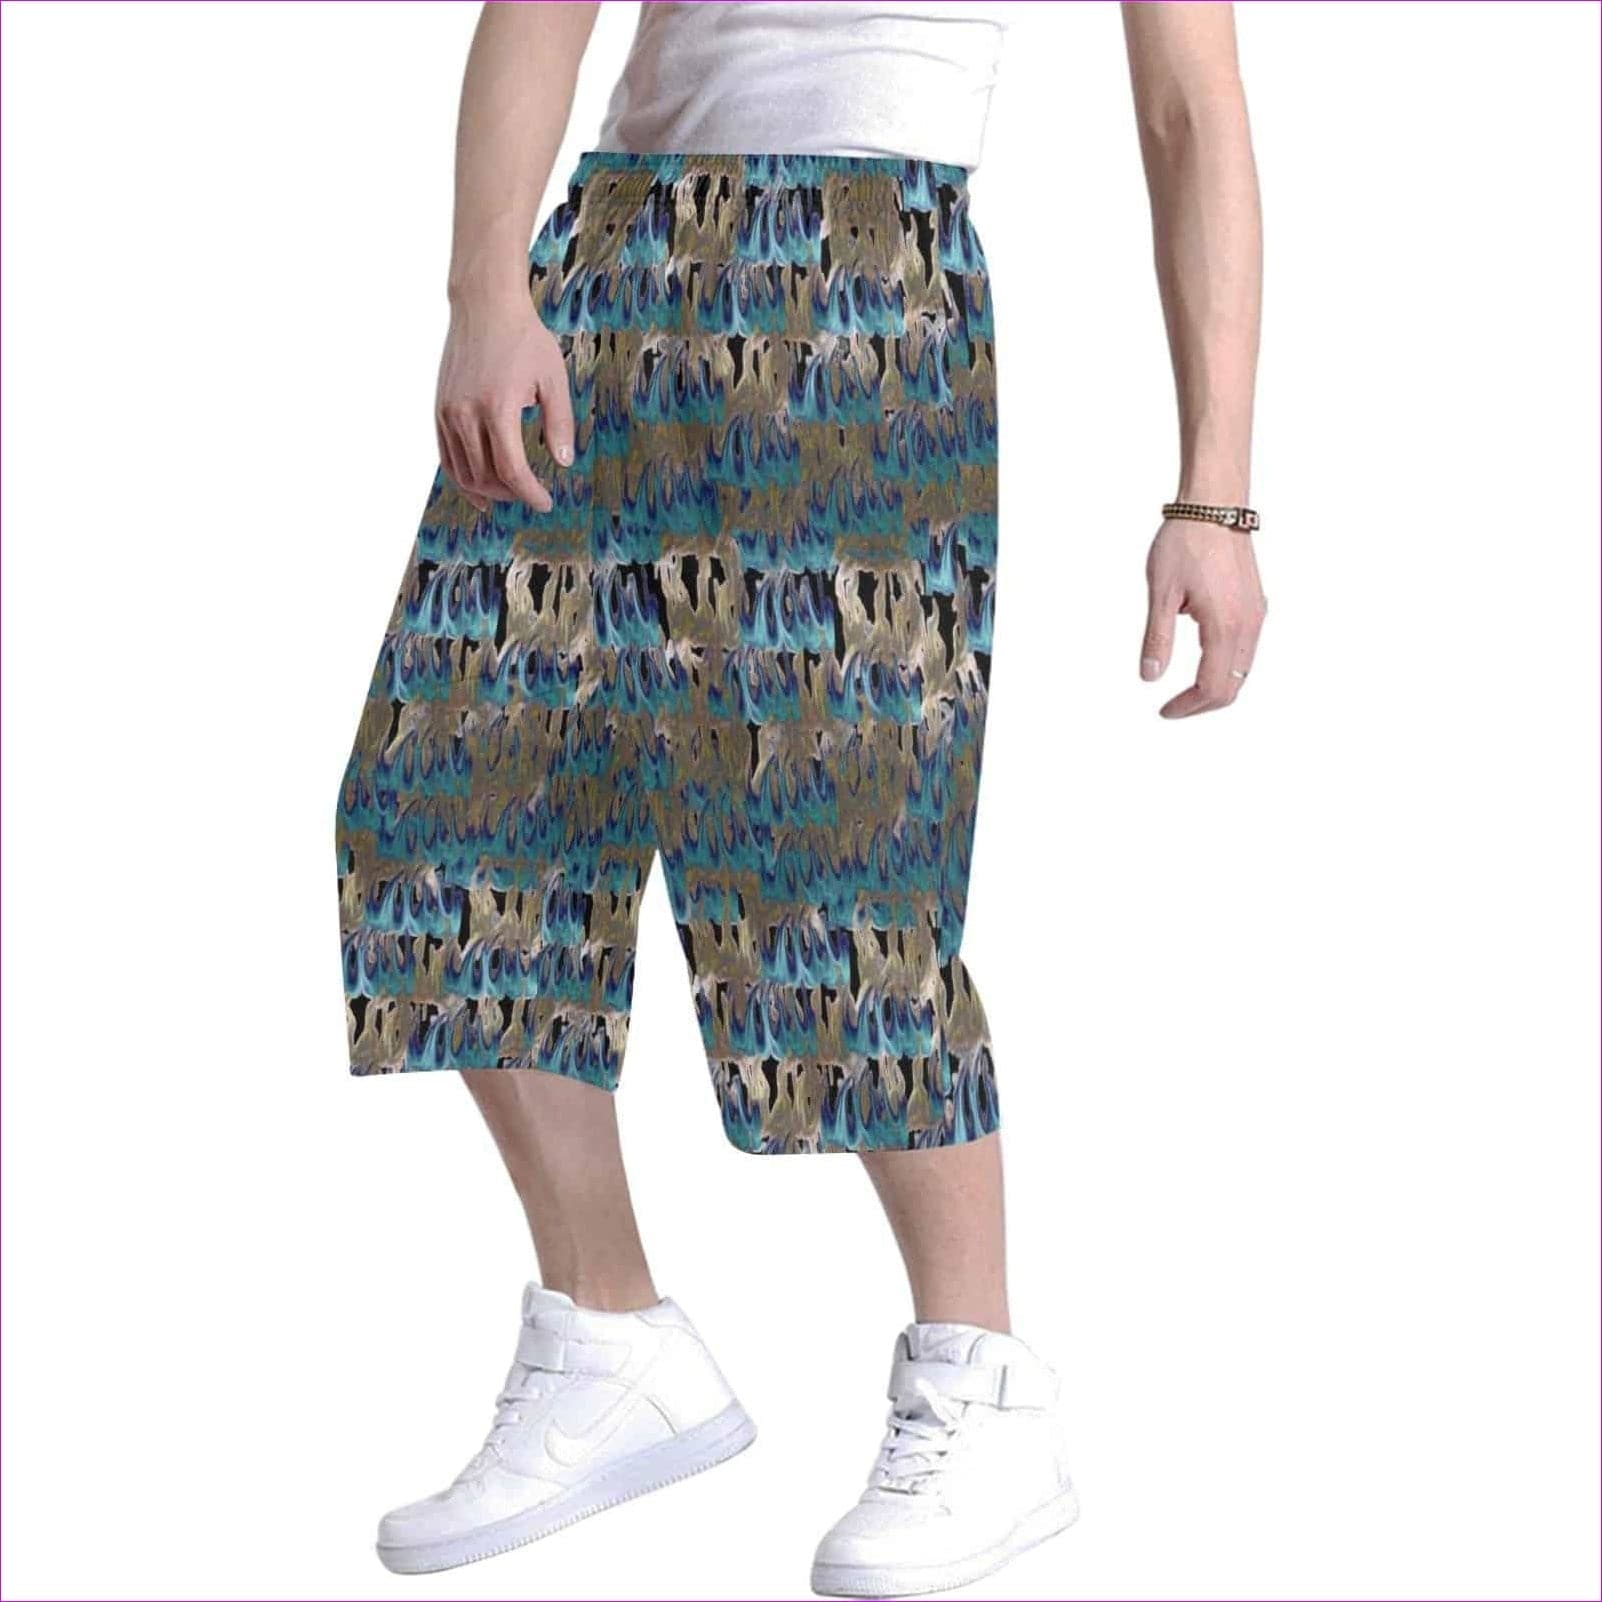 TSWG Flame 2 Men's All Over Print Baggy Shorts (Model L37) TSWG Flame Men's Baggy Shorts - 2 Styles - men's shorts at TFC&H Co.